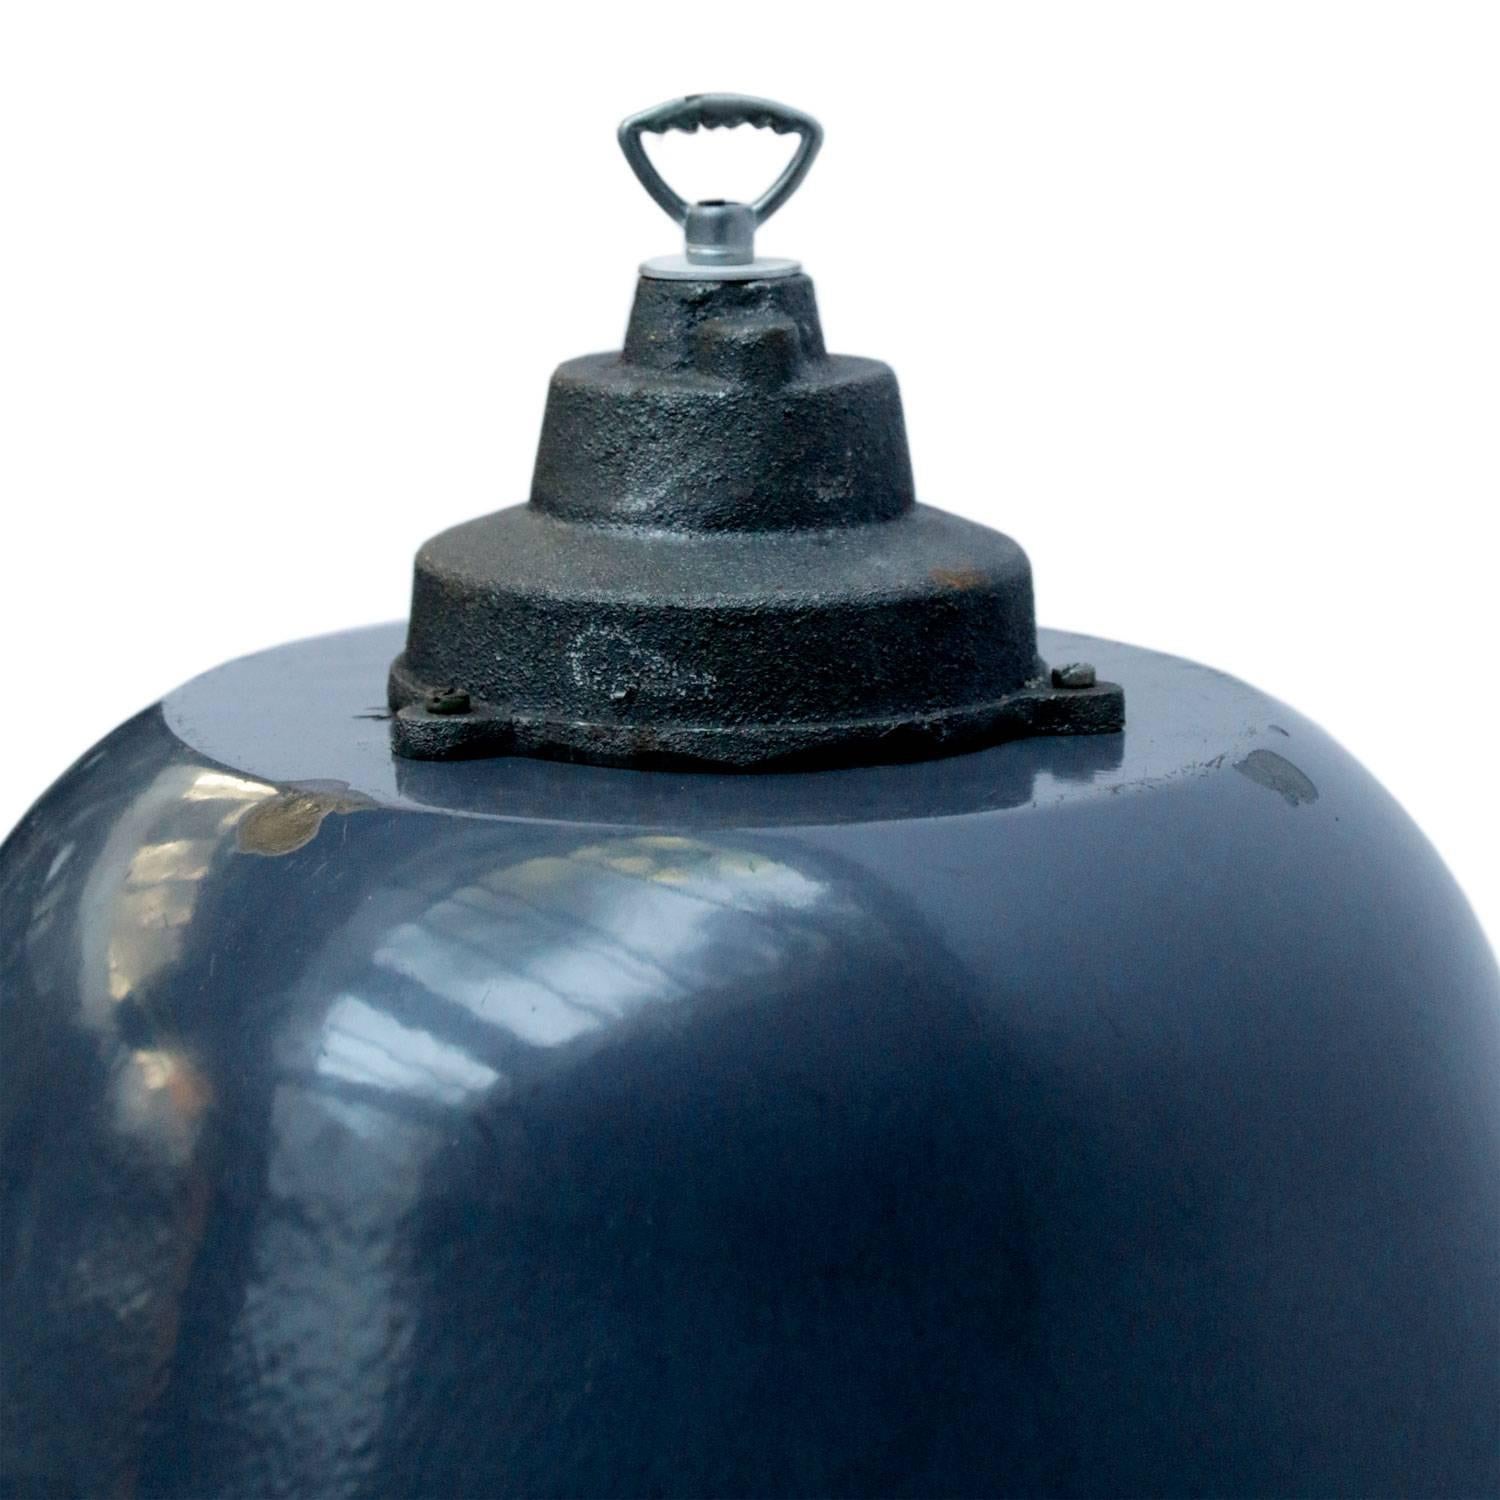 Factory pendant. Dark blue enamel with white interior.
Cast iron top.

Weight: 3.2 kg / 7.1 lb

All lamps have been made suitable by international standards for incandescent light bulbs, energy-efficient and LED bulbs. E26/E27 bulb holders and new